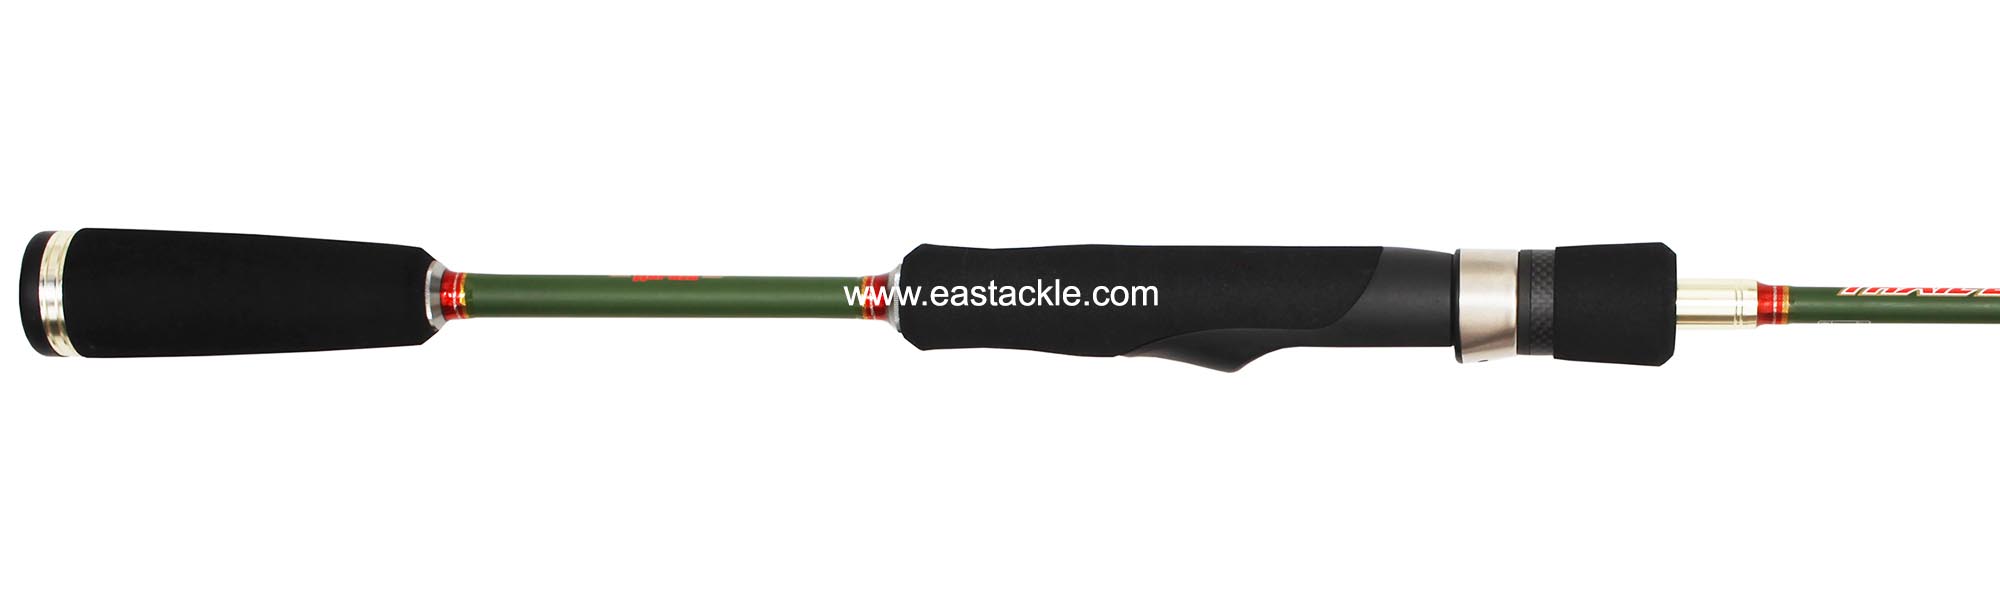 Rapala - Trail Blazer - TRS664LF - Spinning 4 Piece Travel Rod - Rear Grip Section (Side View) | Eastackle